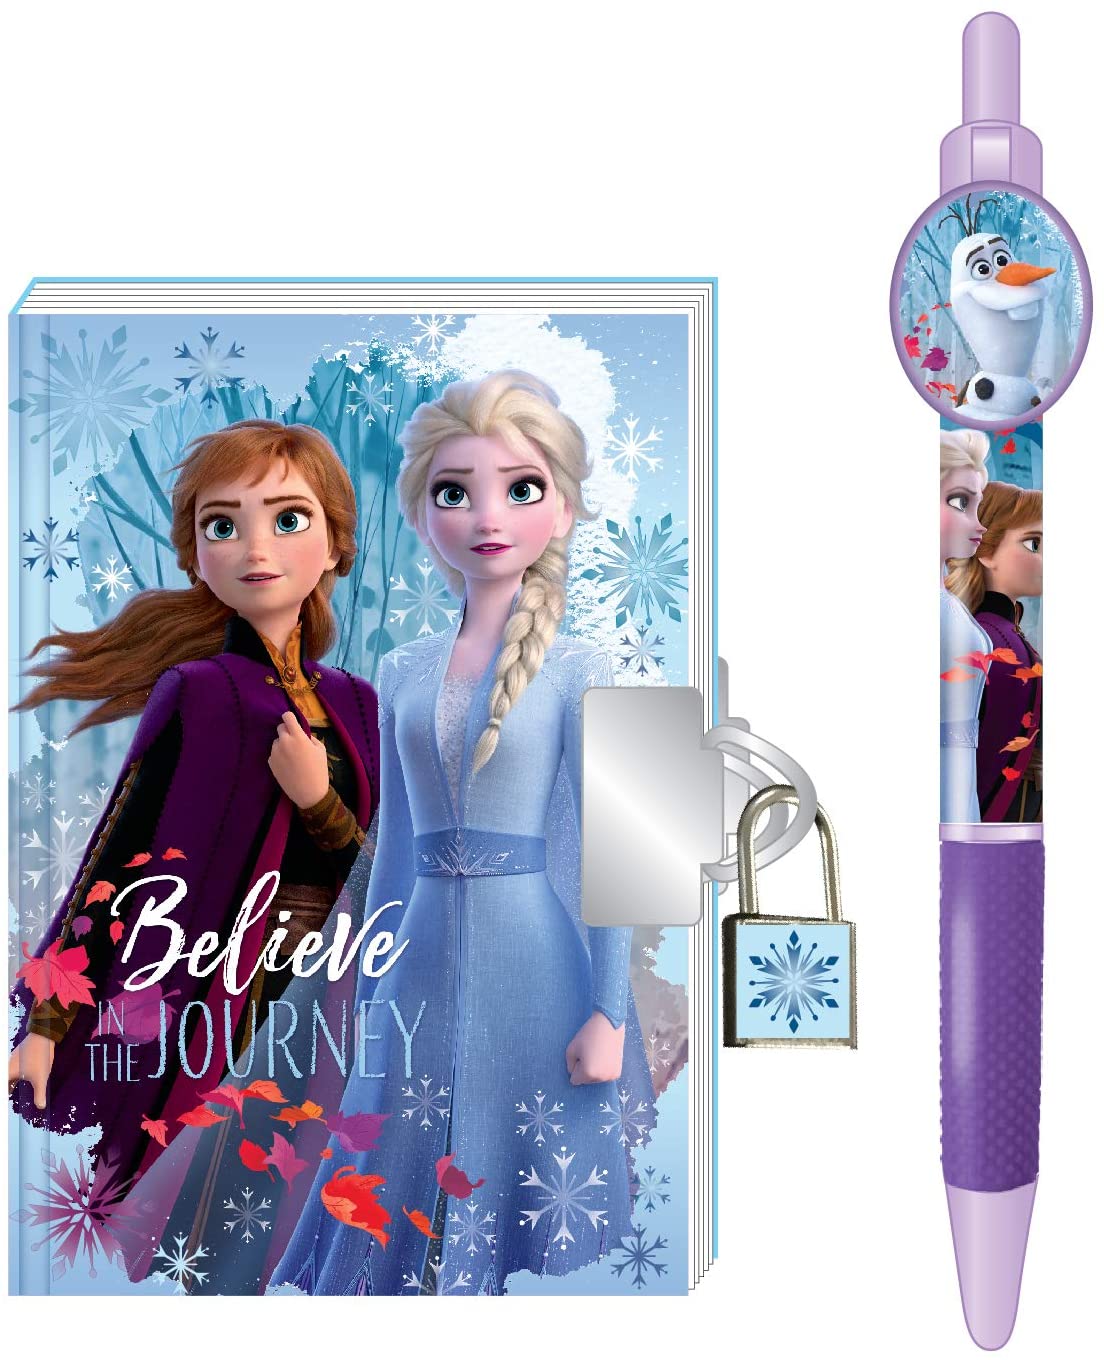 Disney Frozen 2 Anna and Elsa Mini Journal for Girls with Lock, Key and Pen